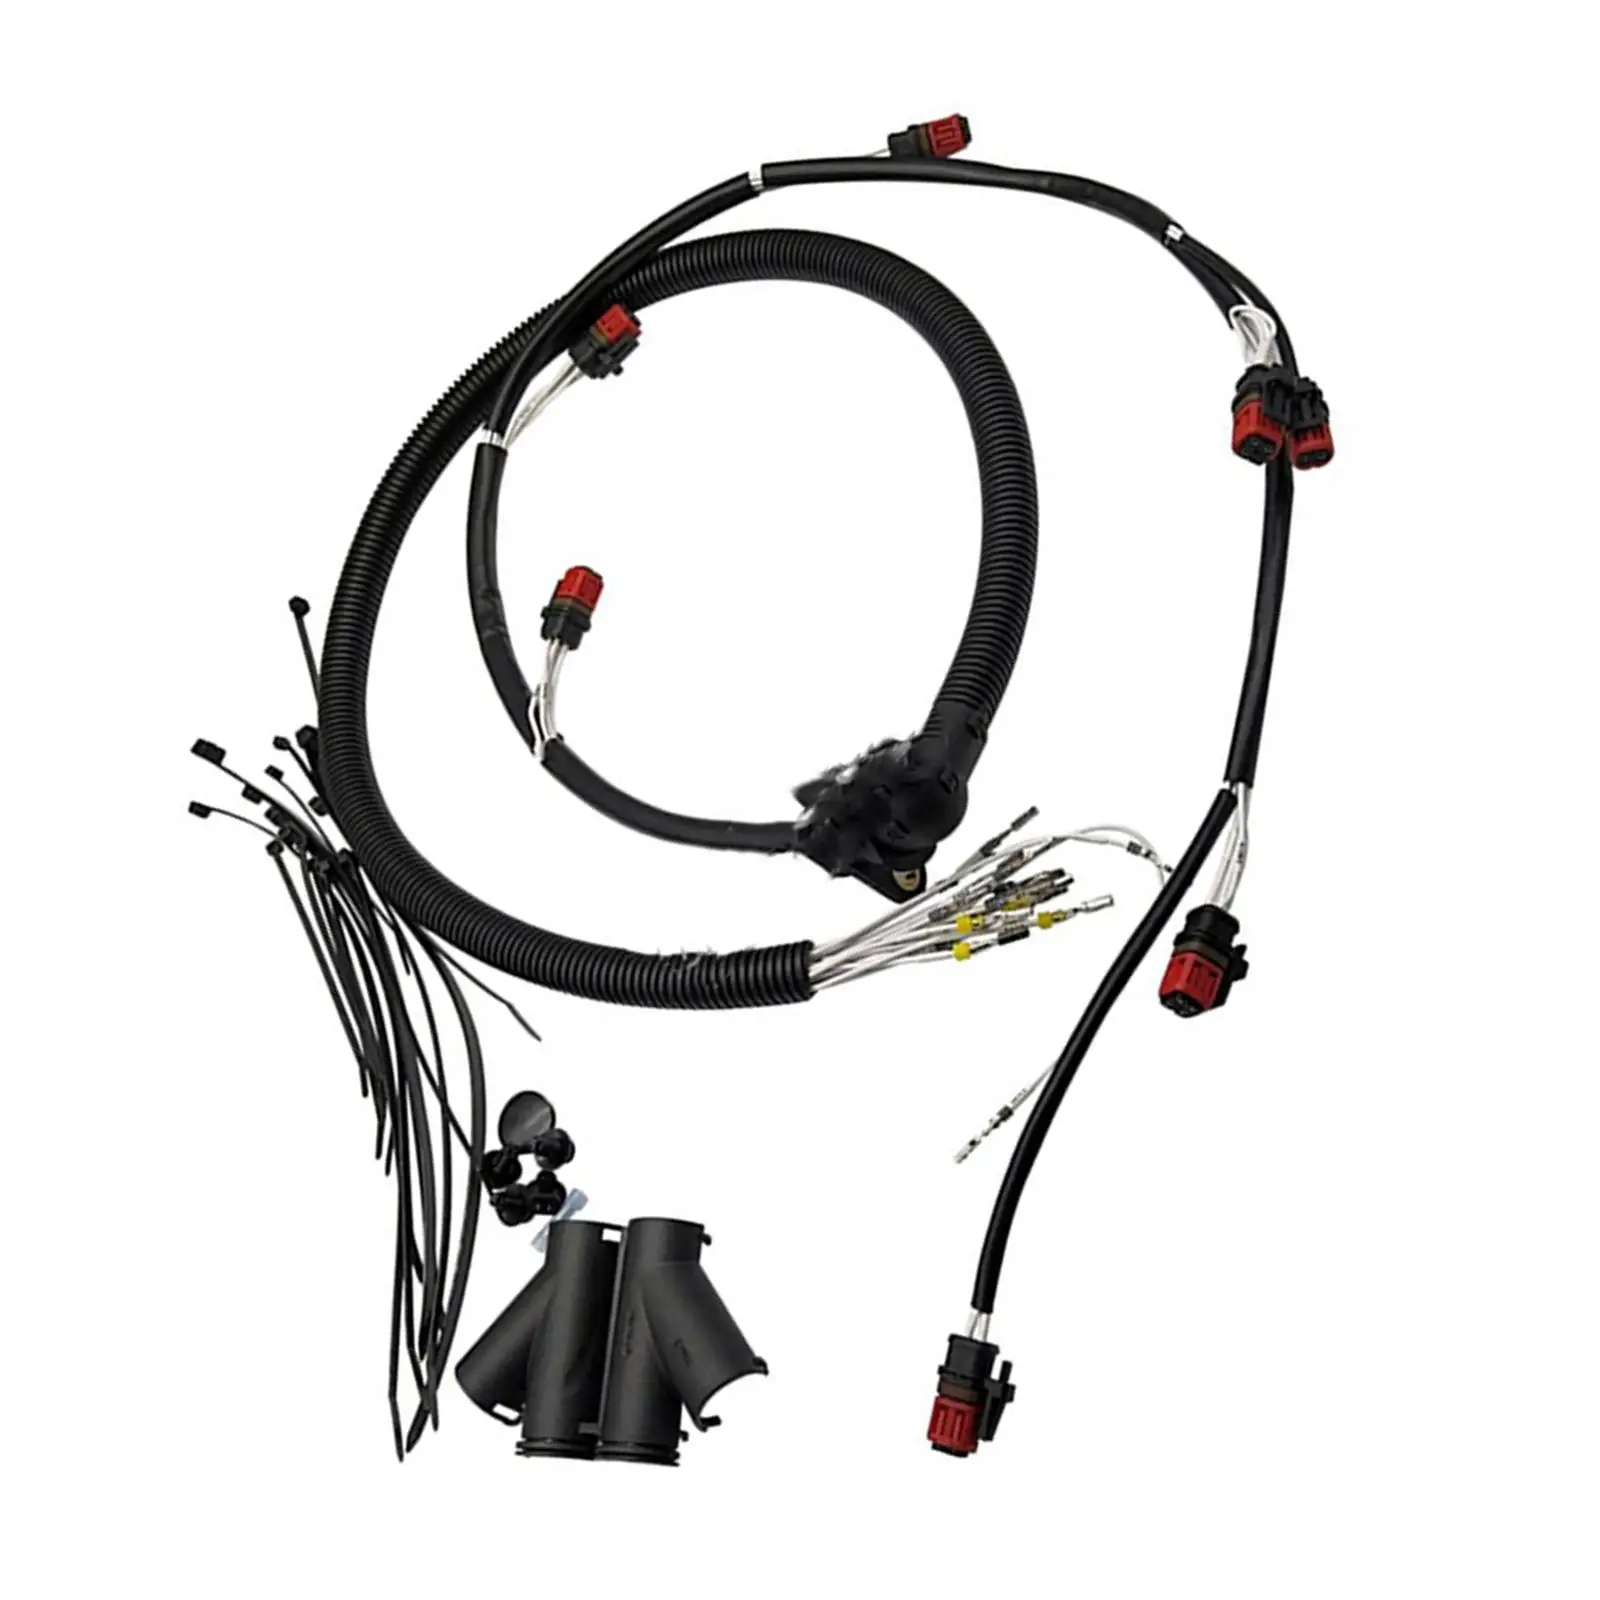 22248490 Engine Wire Harness, Replaces Cable Harness for 